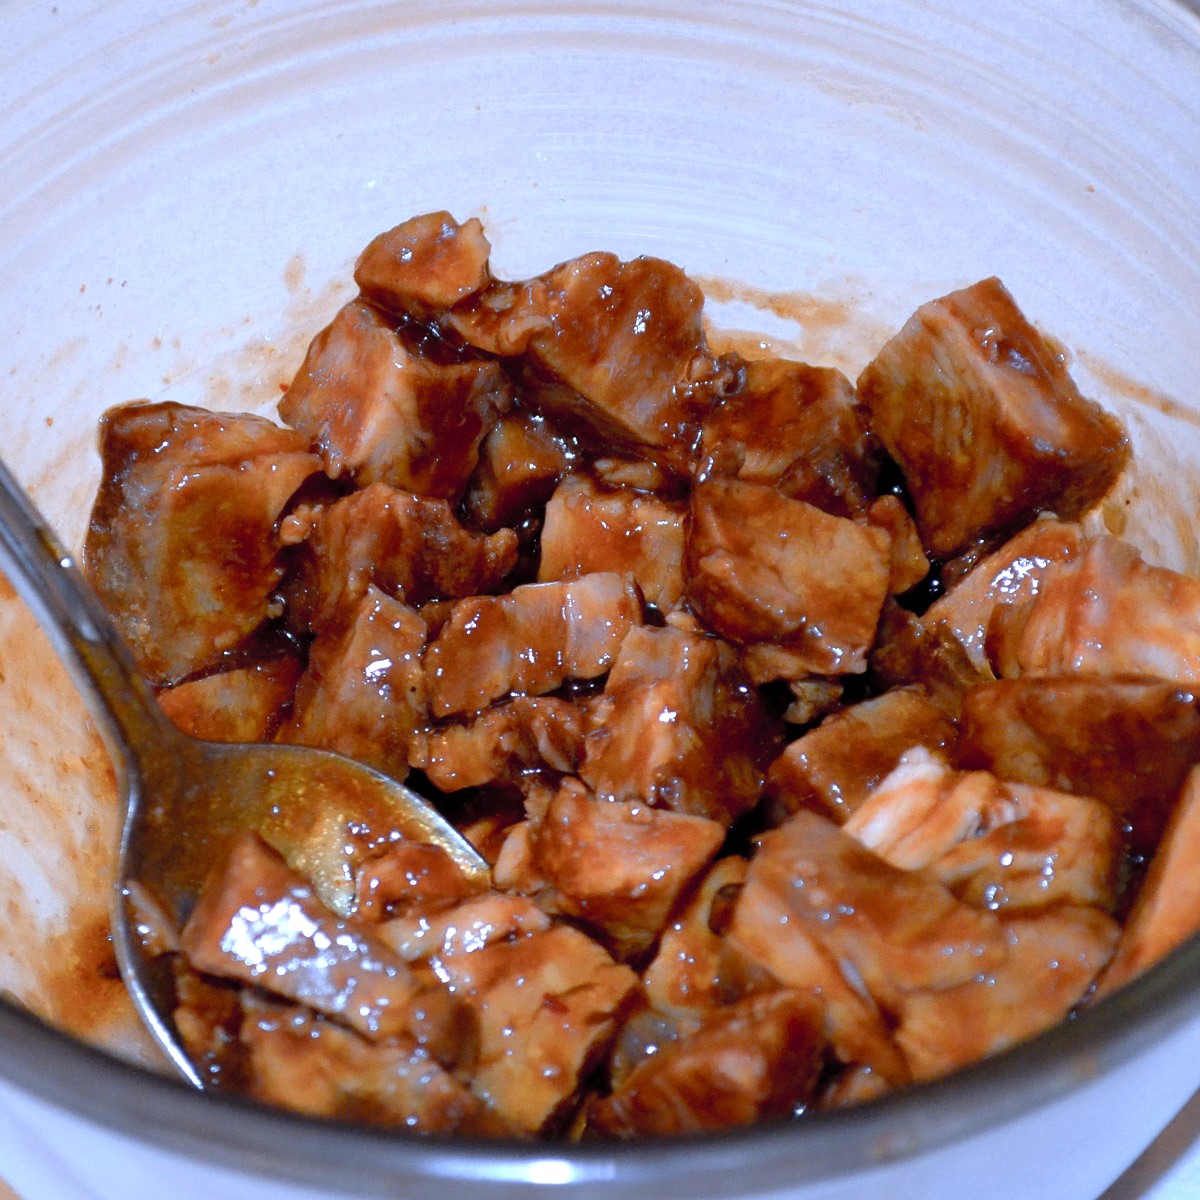 Cubed cooked roast pork marinating in a glass bowl.